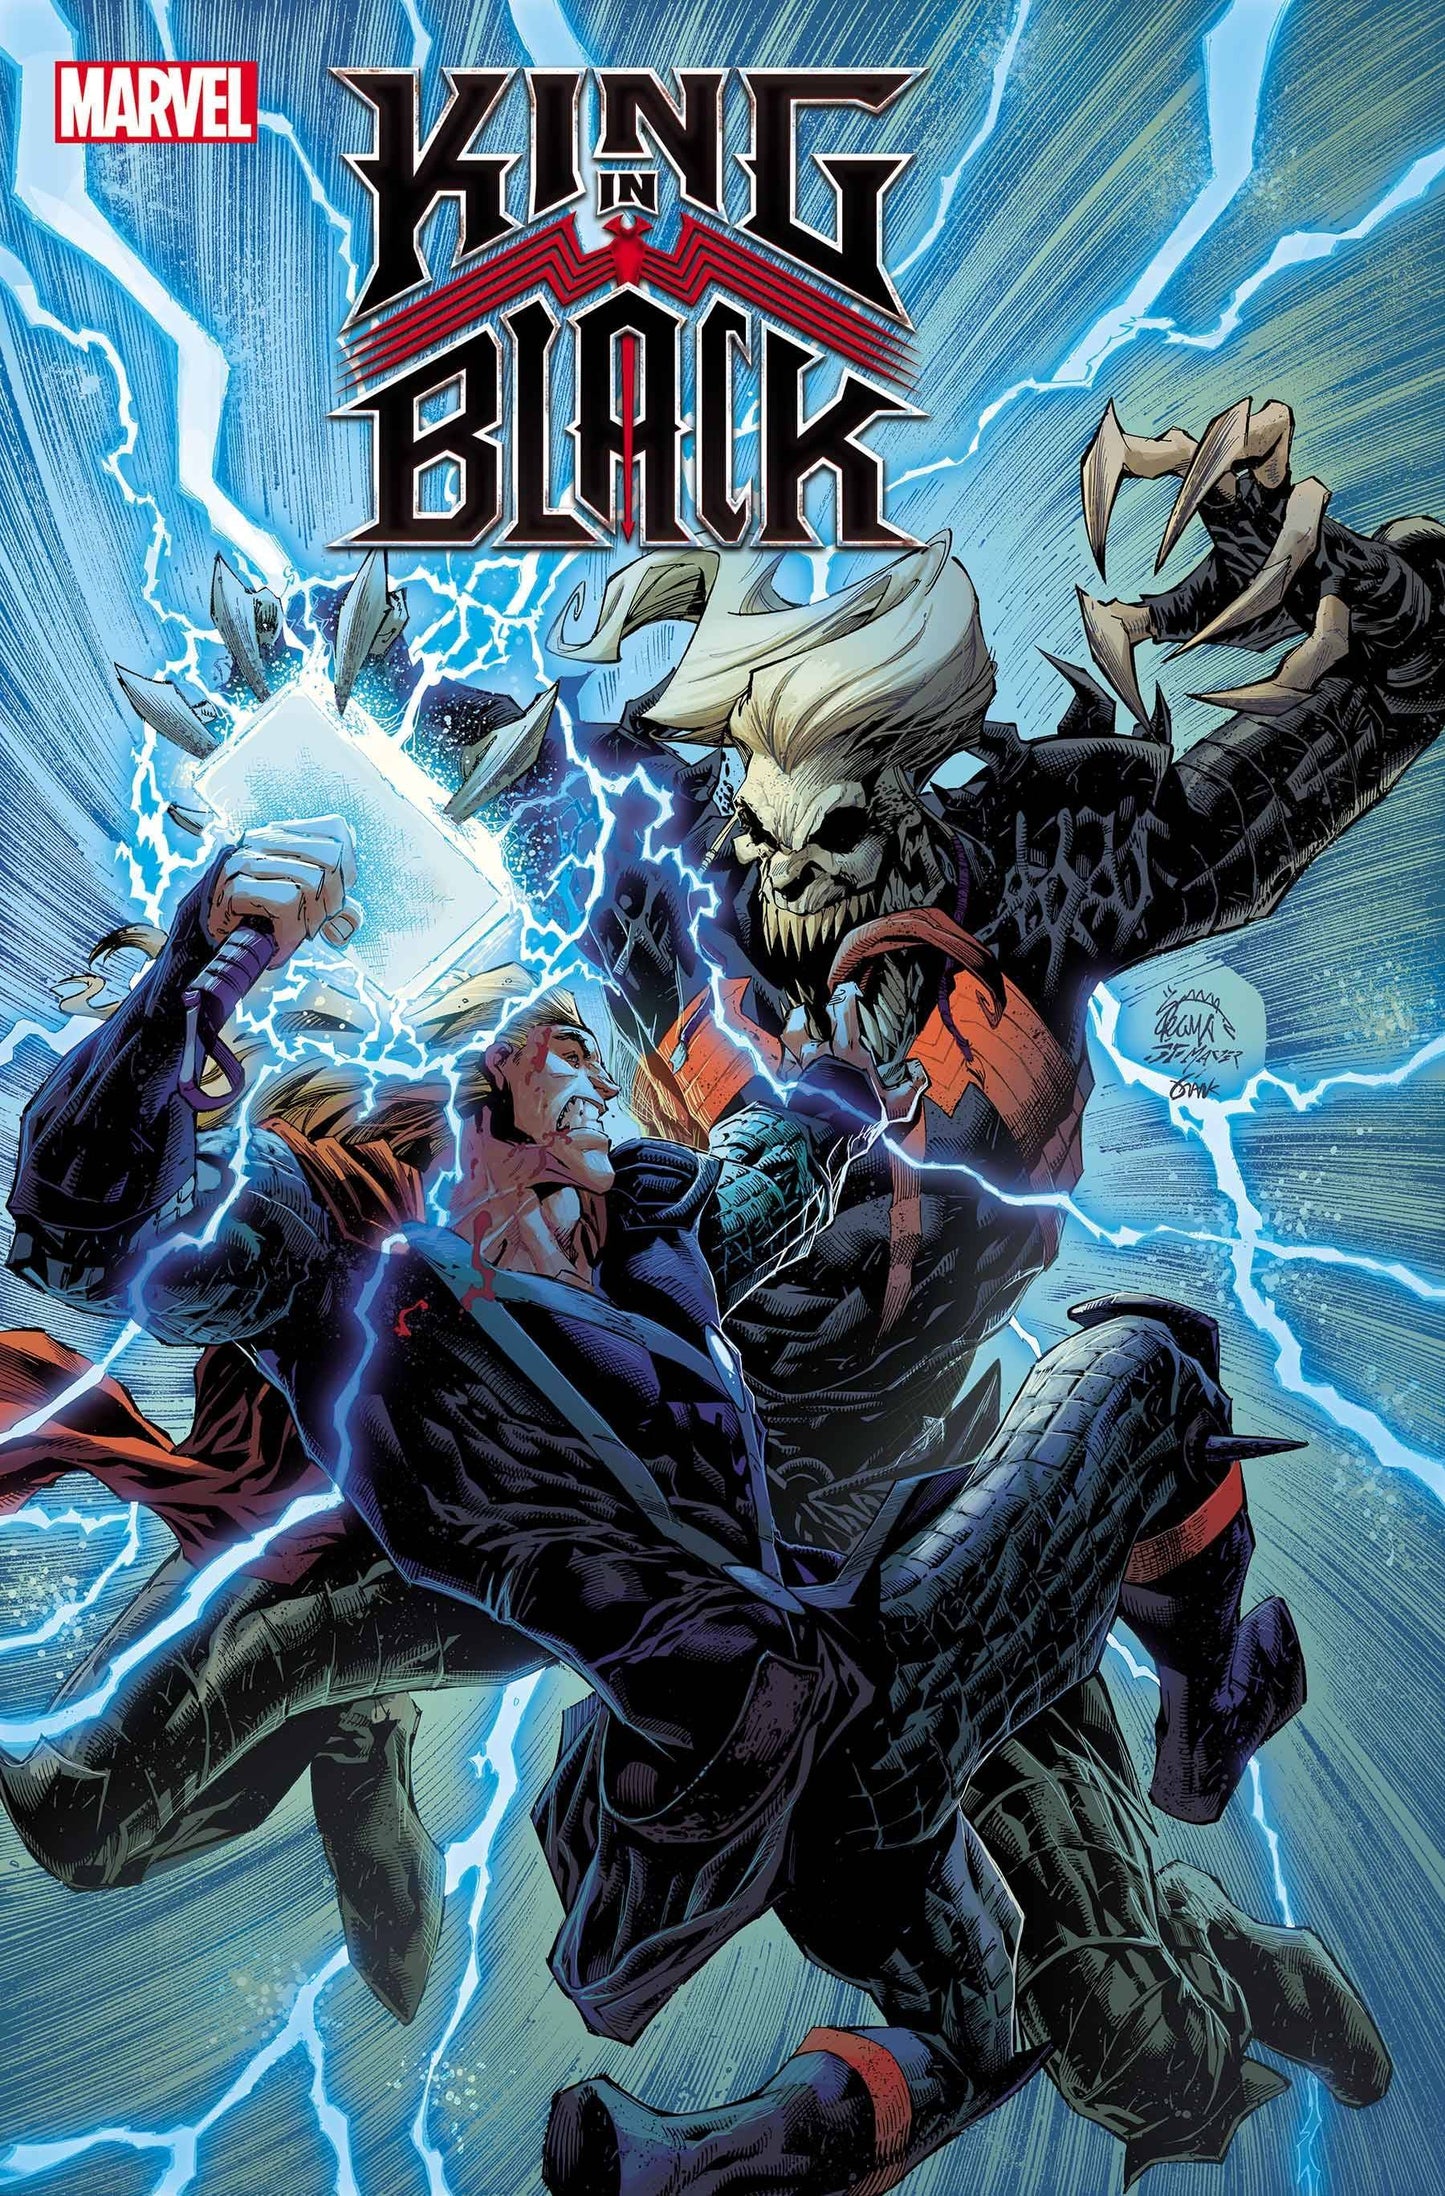 King In Black #3 (Of 5) (01/20/2021) %product_vendow% - The One Stop Shop Comics & Games